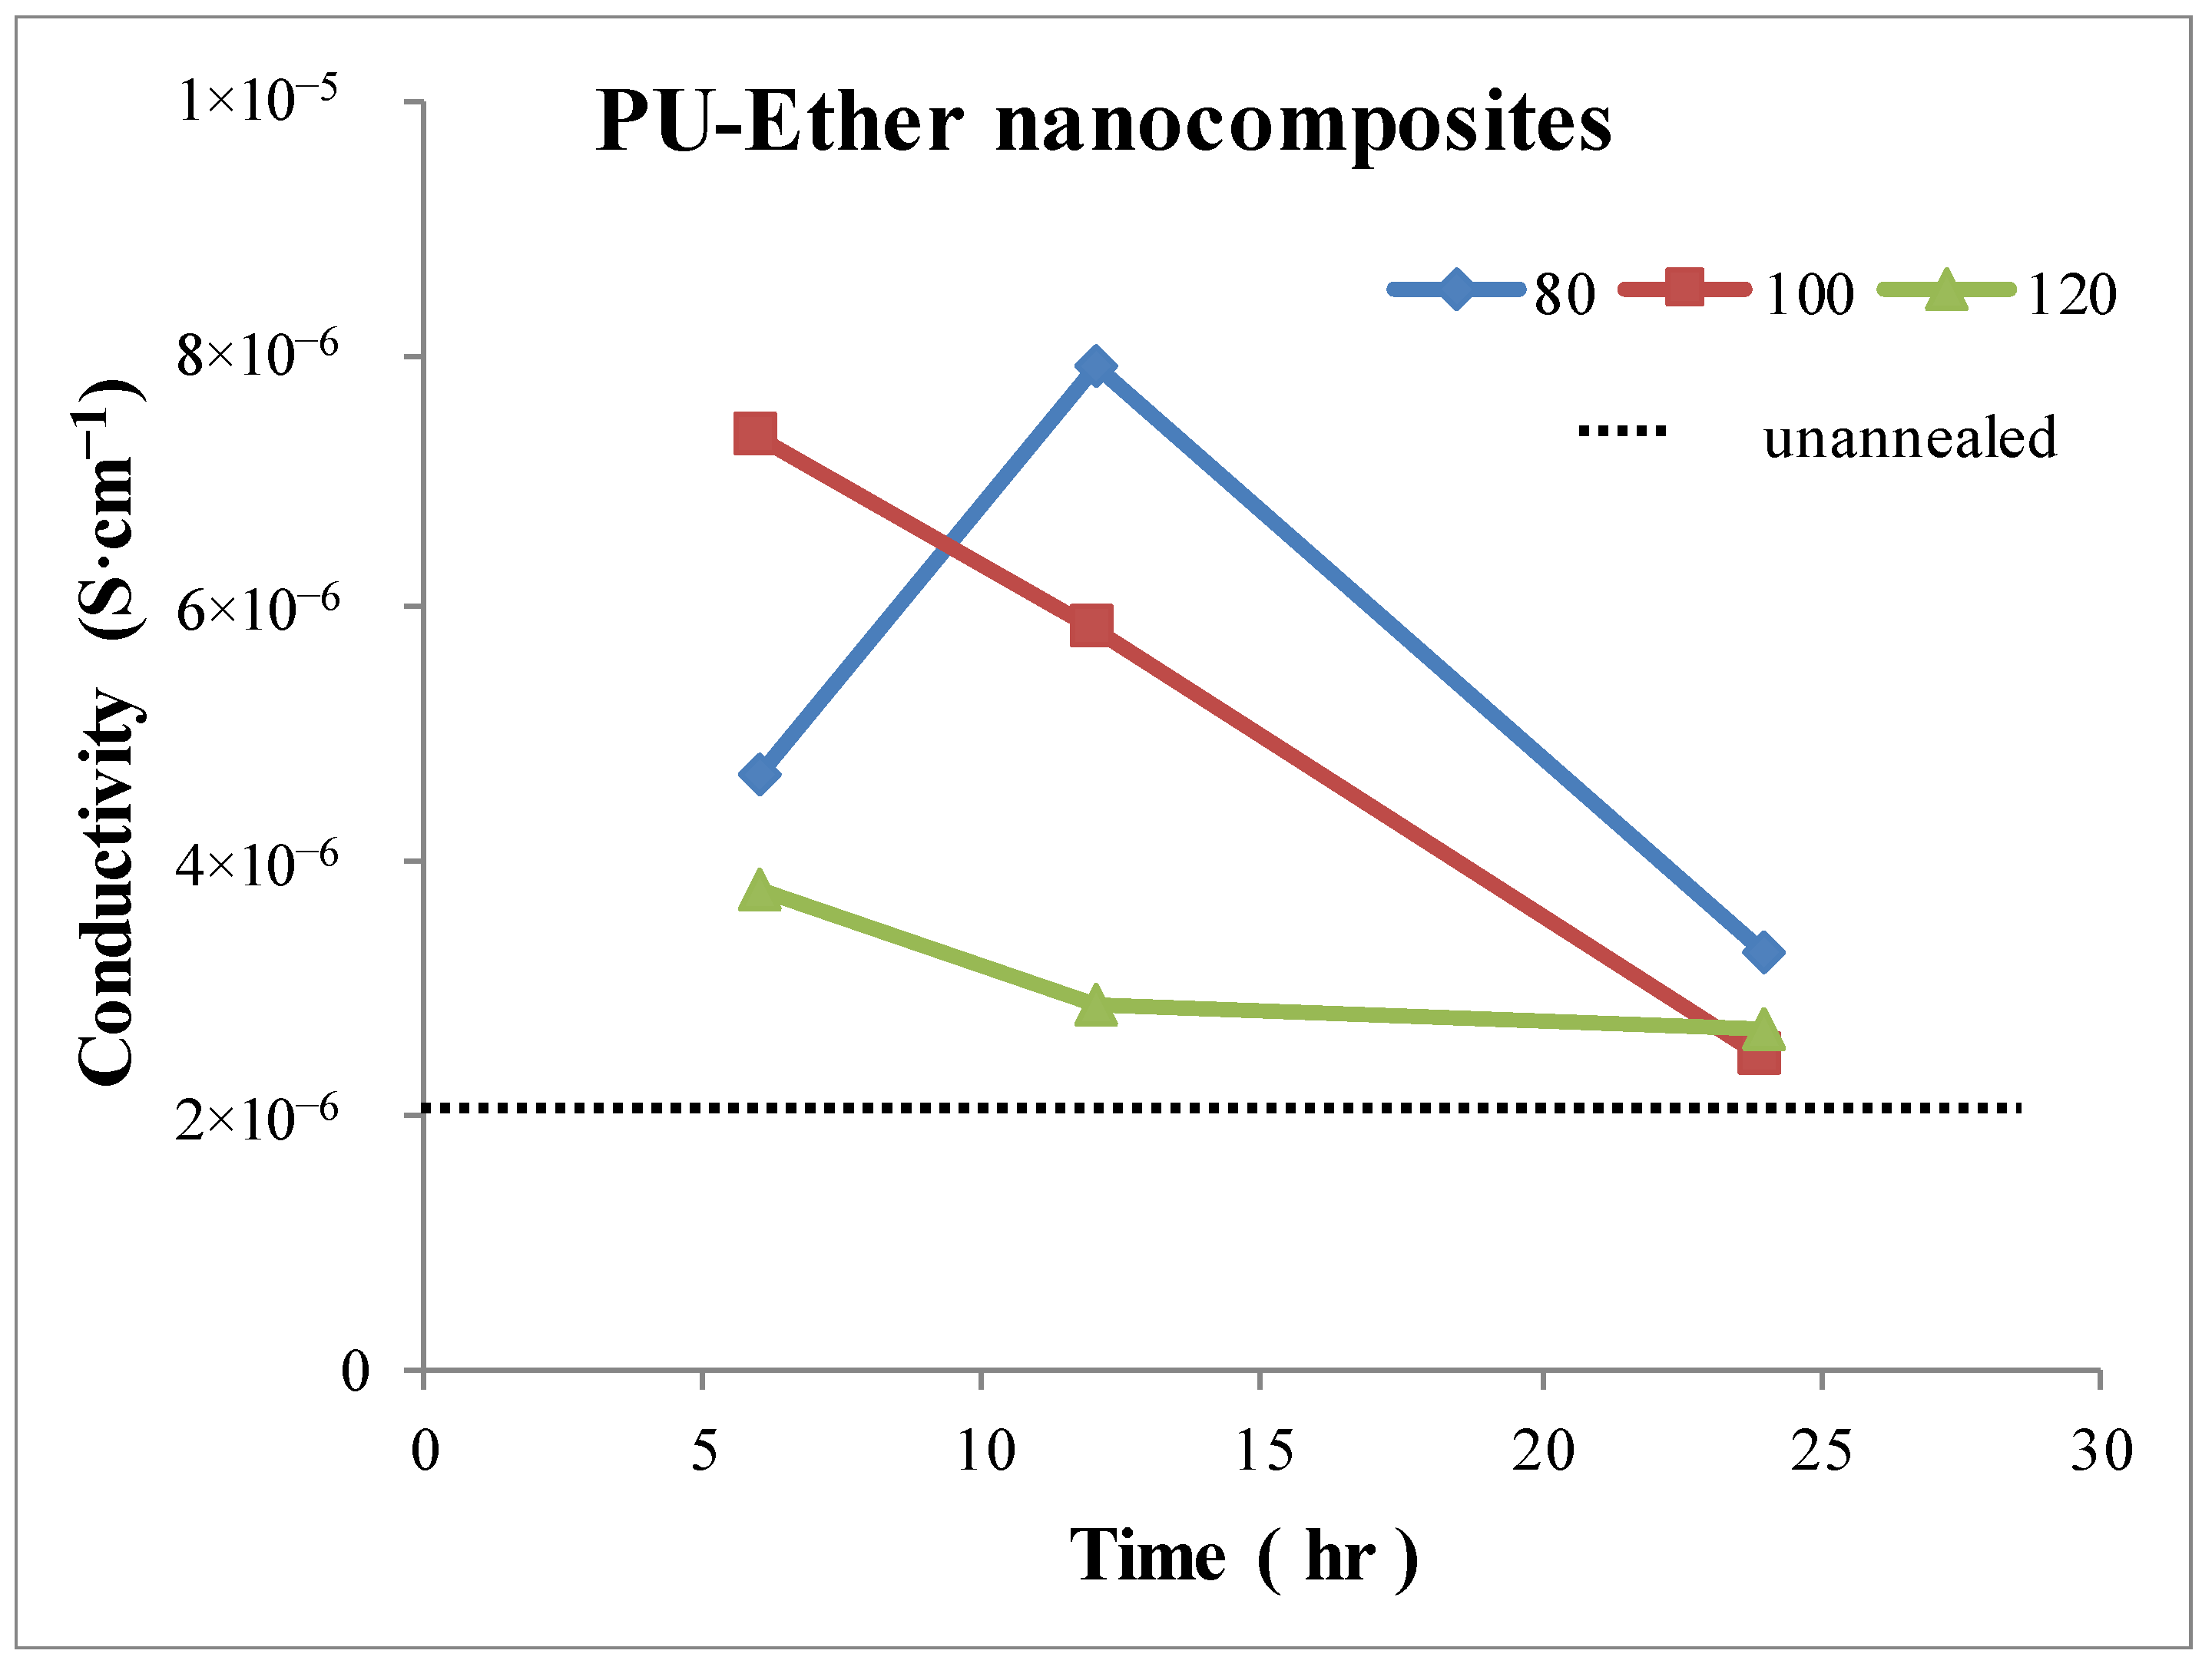 Polymers | Free Full-Text | Effects of Annealing Temperature and Time on Properties of Polyurethane Based on Different Soft Segments/Multi-Walled Carbon Nanotube Nanocomposites